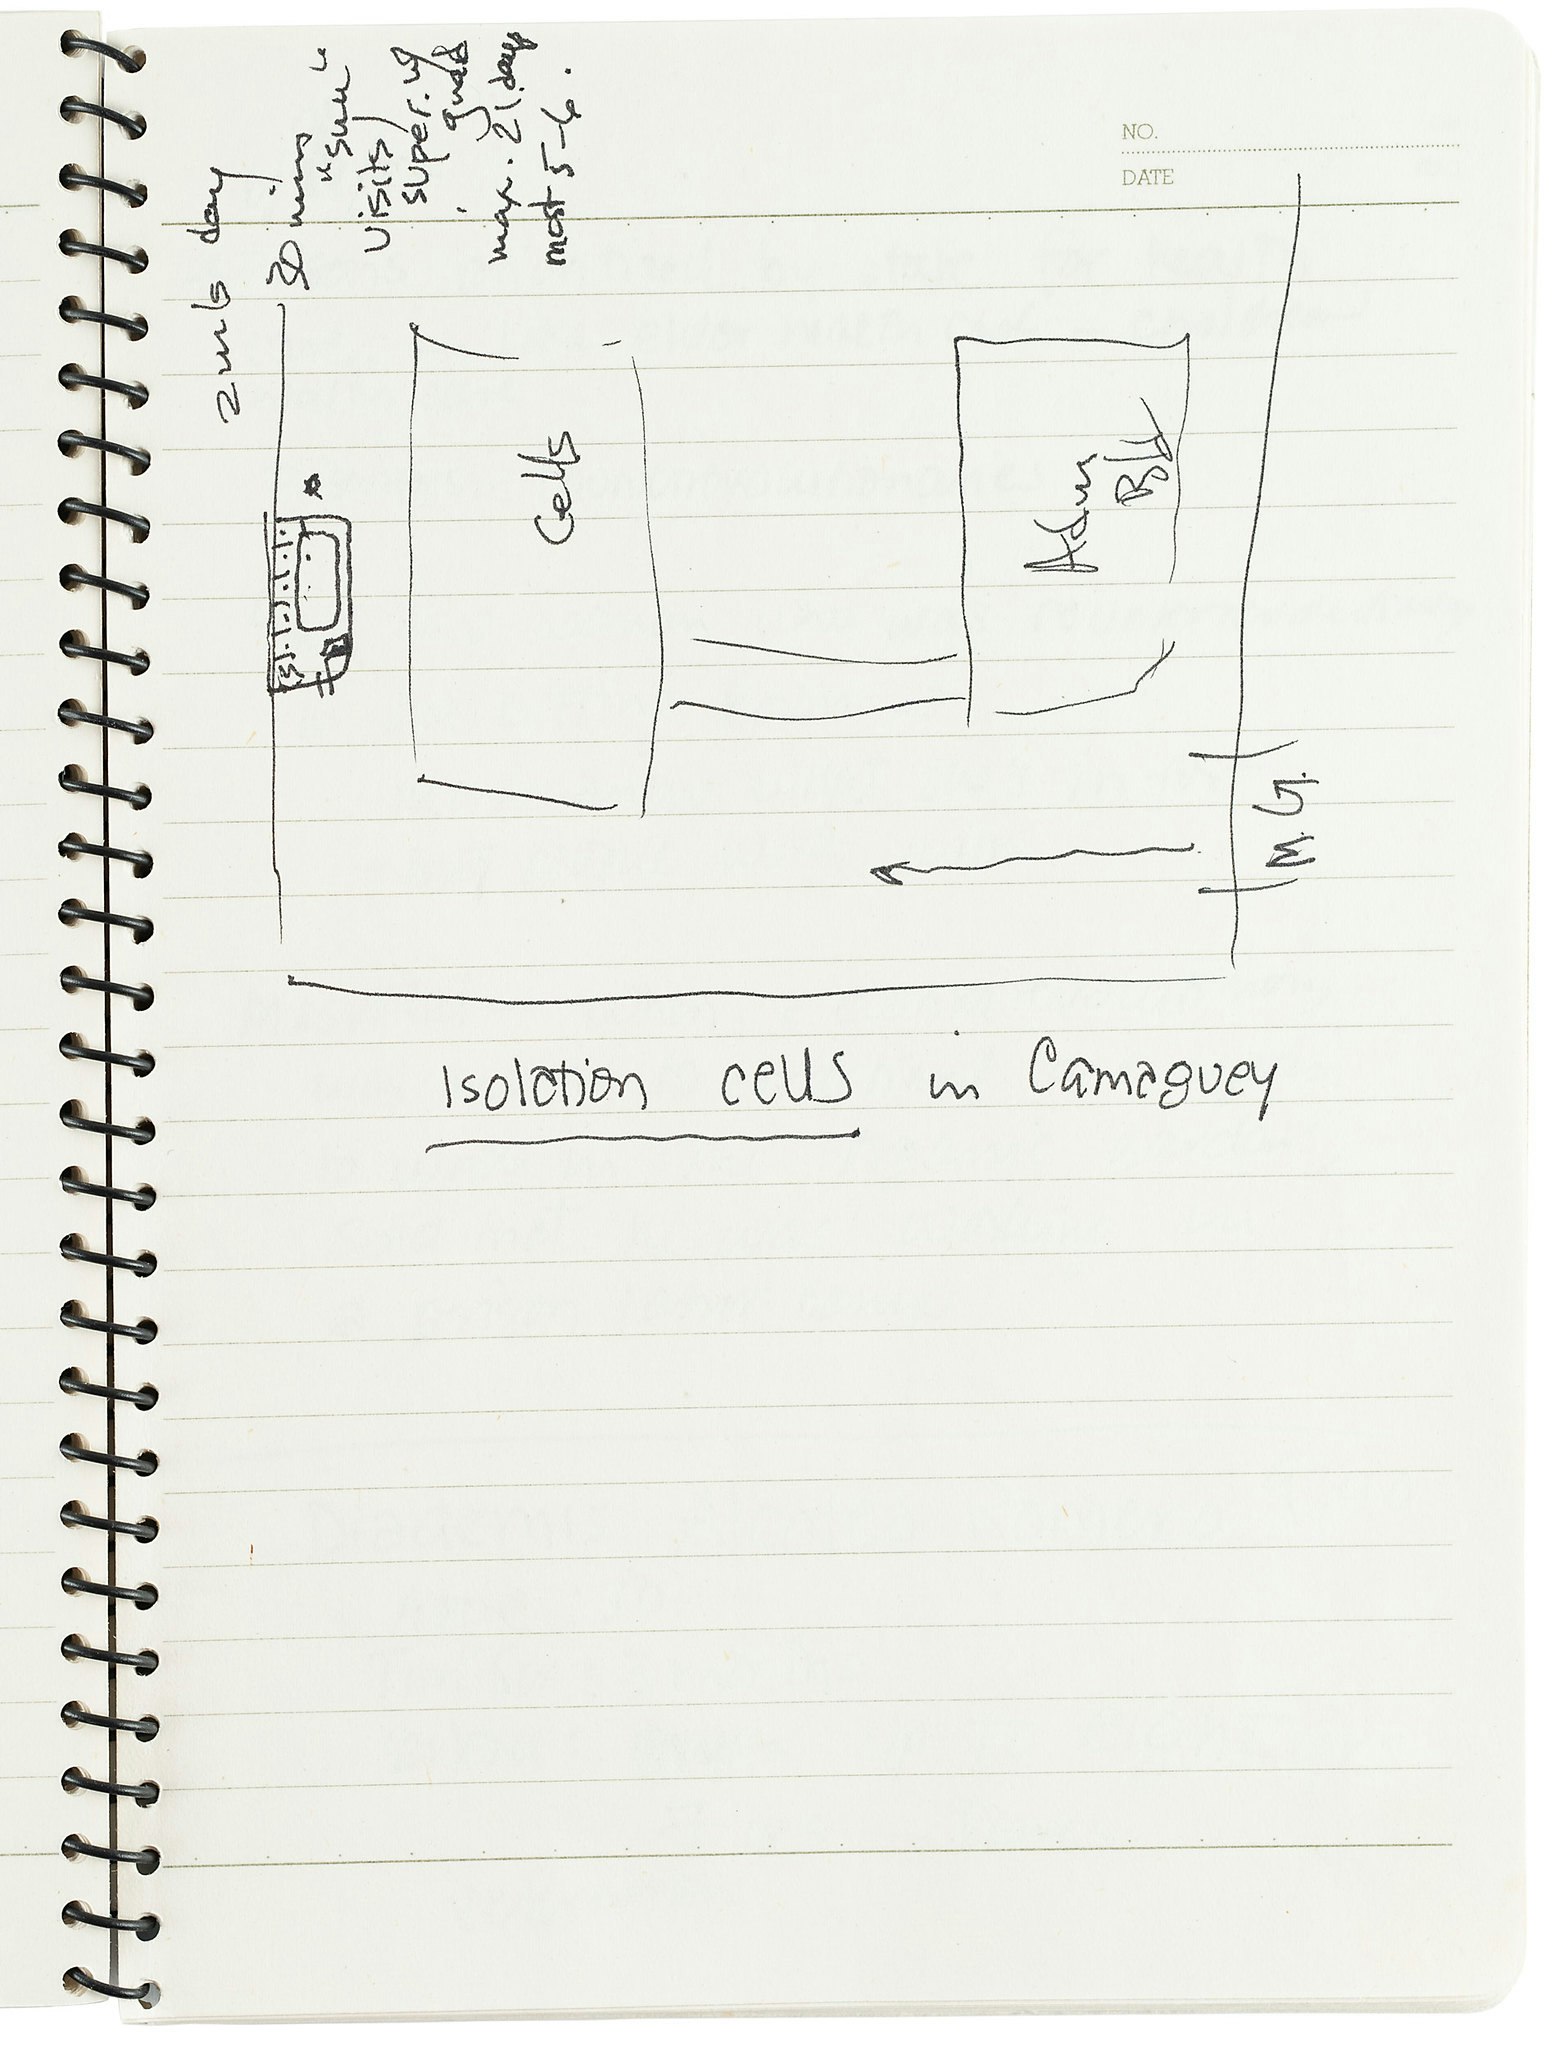 Sketch of women's prison cell on white lined paper.